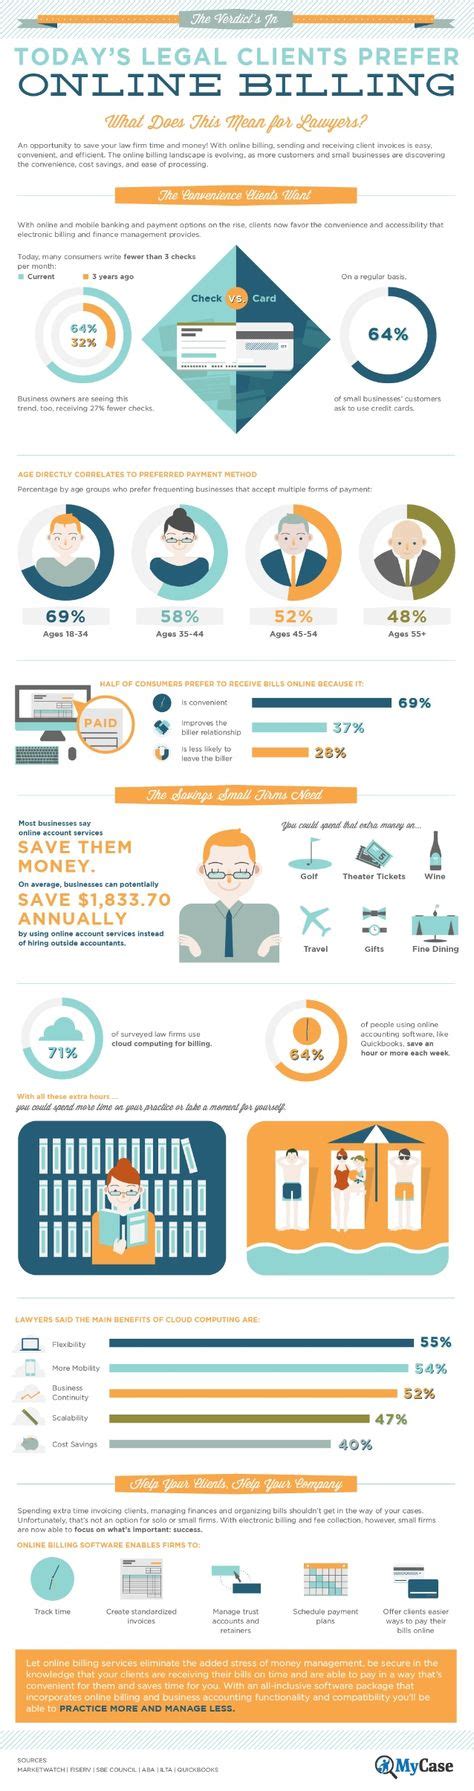 11 Best Infographics For Lawyers Images Infographic Lawyer Law School